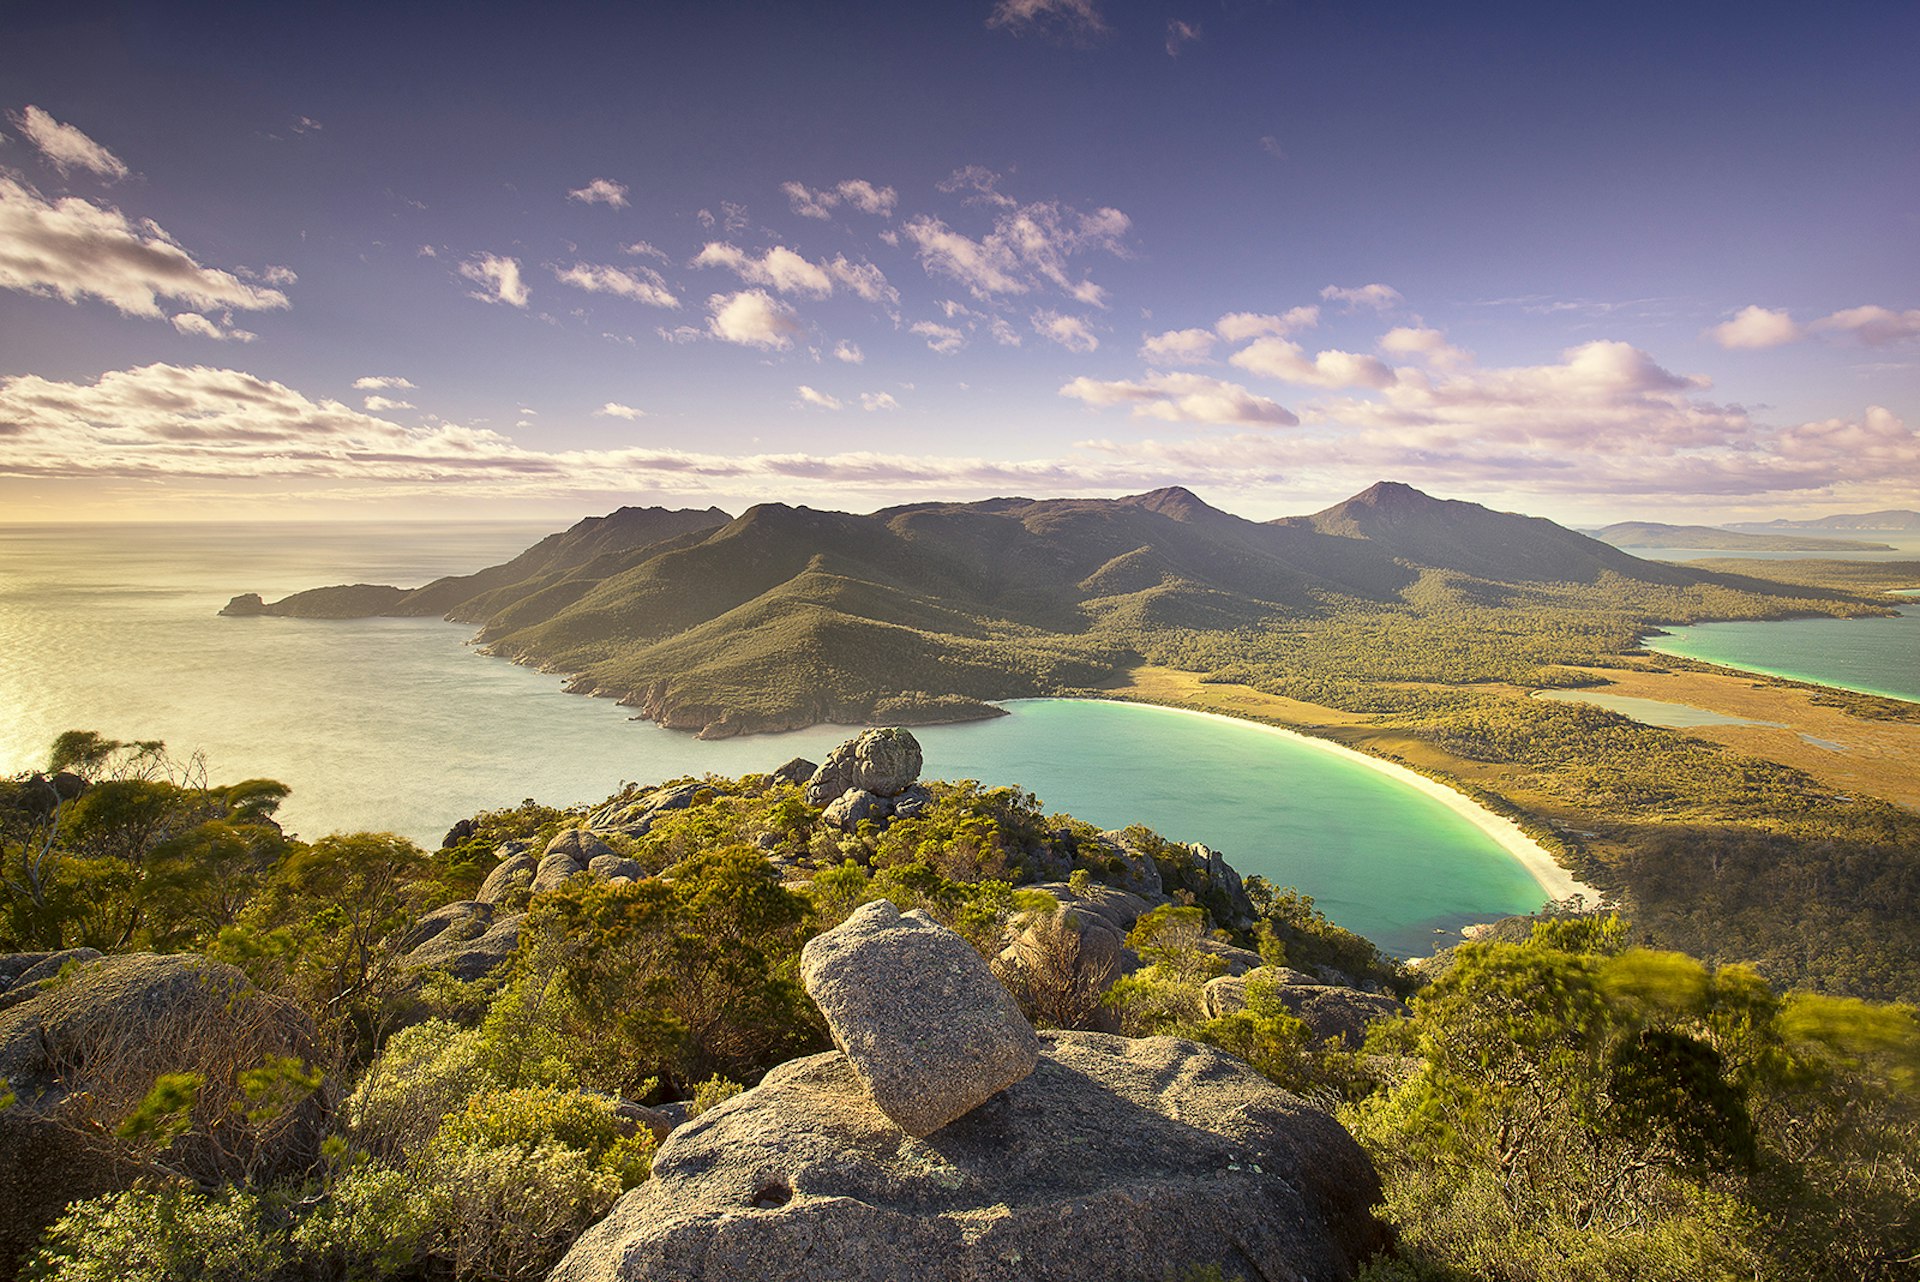 Top of Mt Amos over looking Wineglass Bay, Tasmania at dusk. There are rocks and shrubs in the foreground before giving away to a beautifully smooth beach and blue sea. The sun is low in the sky, throwing out very ambient light. 